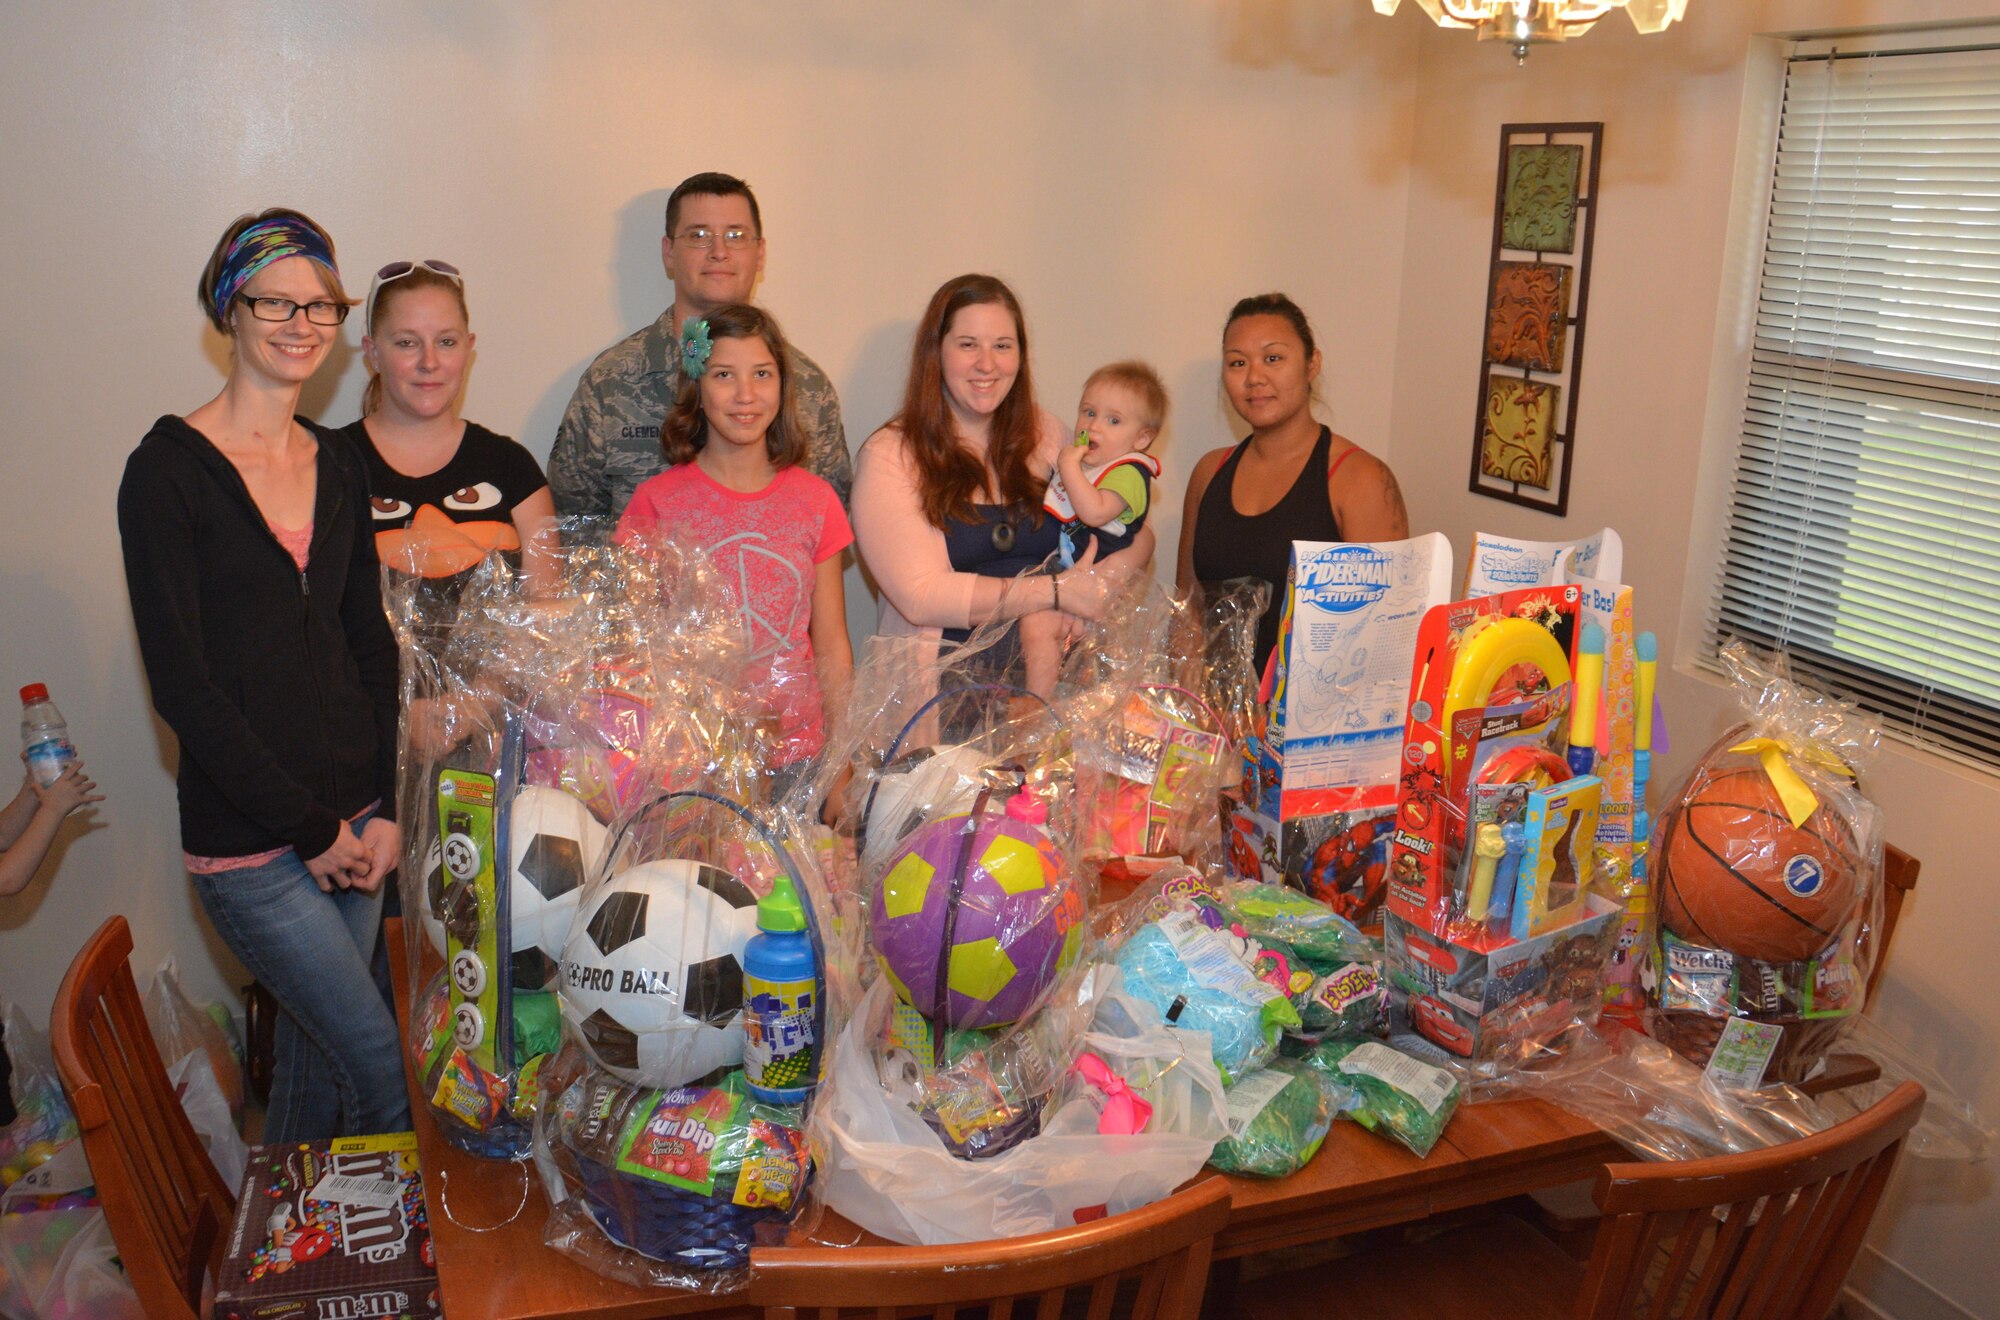 Members and family members of the 36th Operations Support Squadron pose in front of several donated Easter baskets for children living at the Guma San Jose Homeless Shelter in Dededo, Guam April 12, 2014. More than 70 36th OSS members and other Andersen volunteers planned, donated, collected and volunteered for the event. (U.S. Air Force courtesy photo/Released)